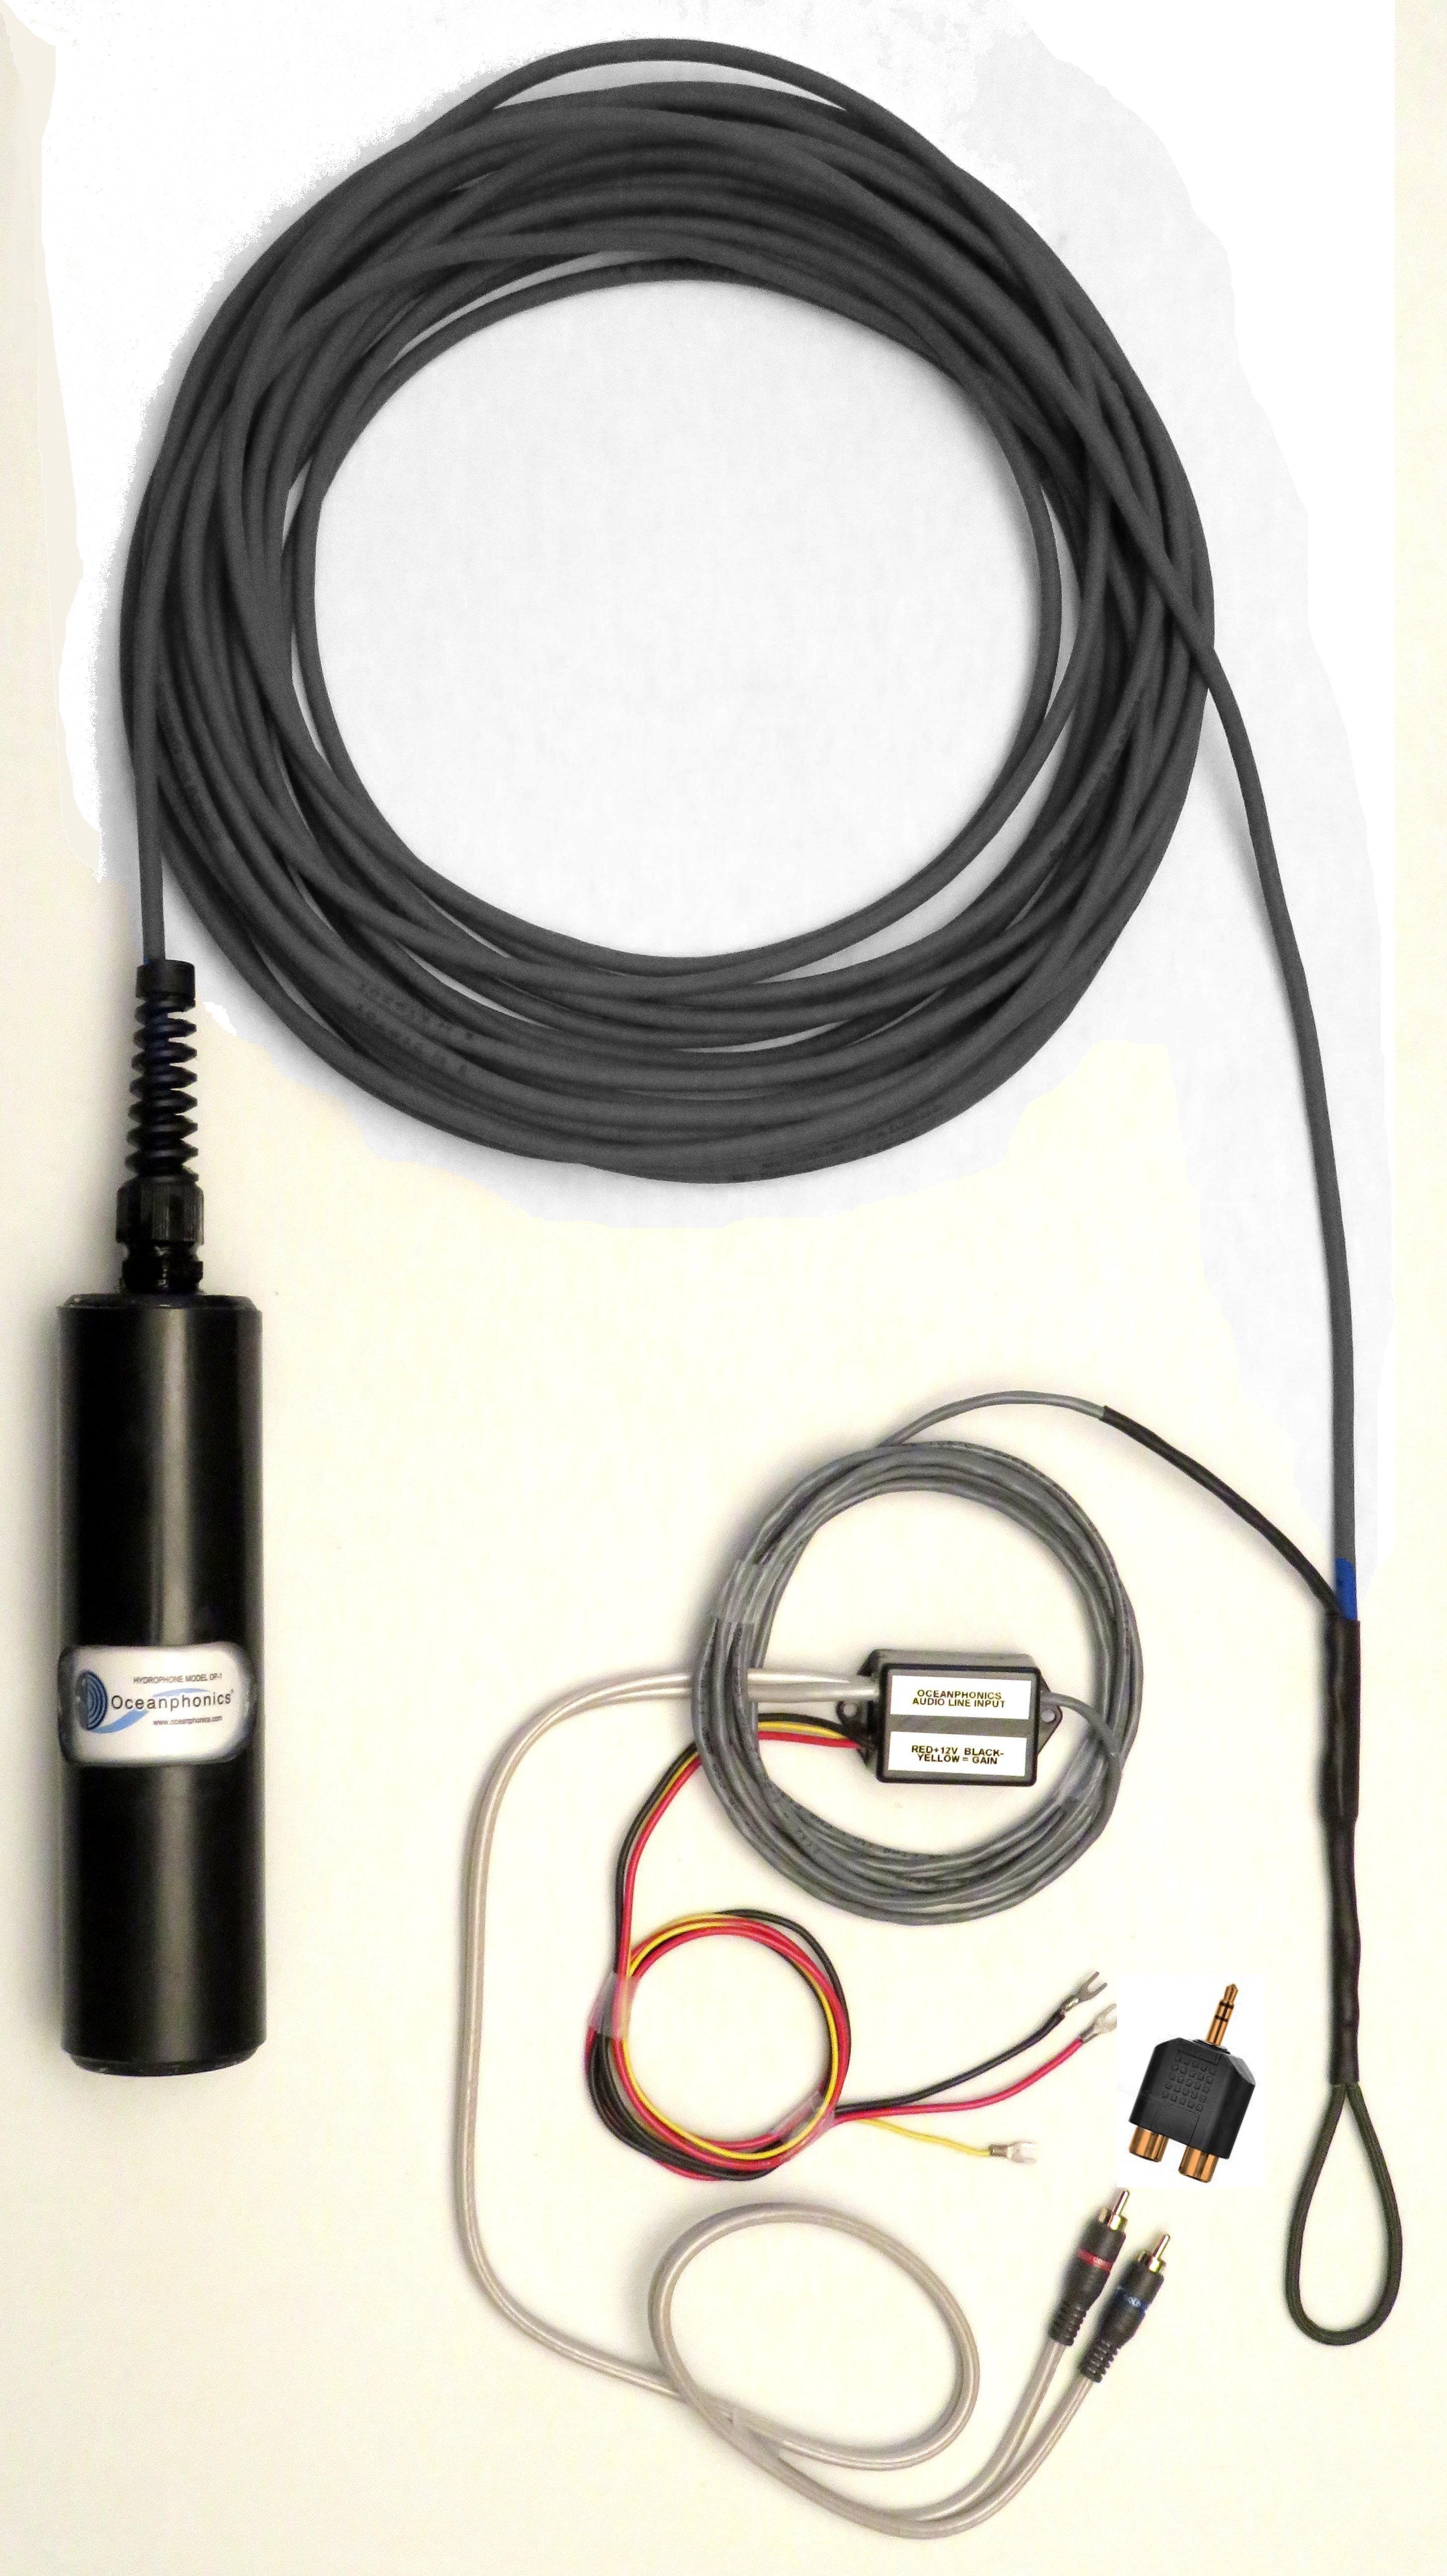 Model OP-1 Hydrophone with 25 foot cable